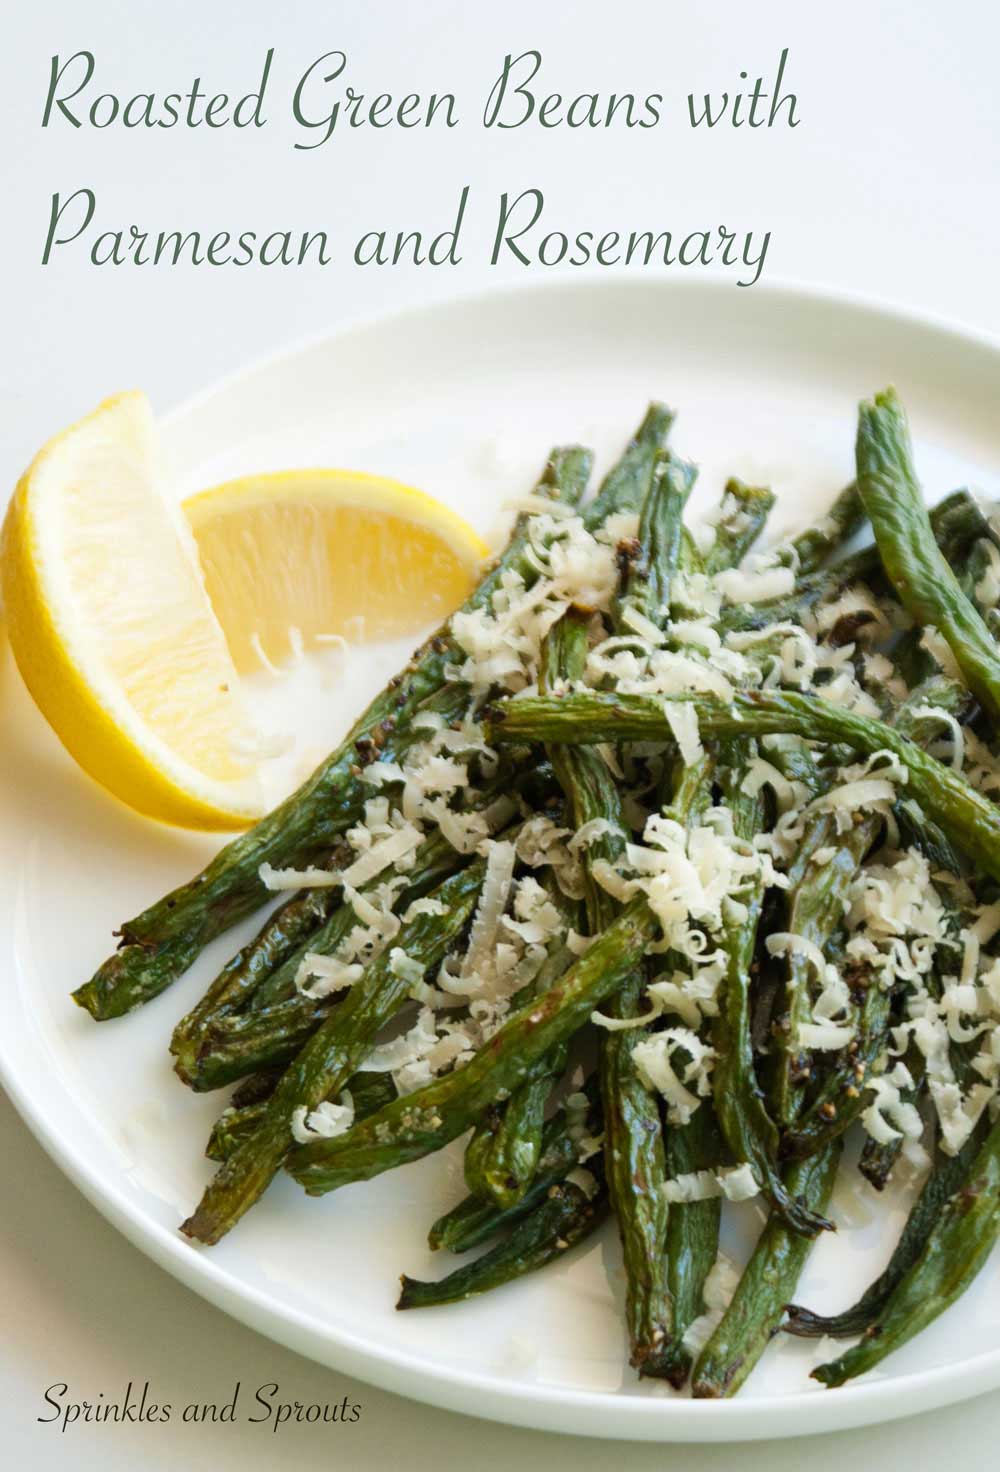 Roasted Green Beans with Parmesan and Rosemary. A great side dish, the beans are tender but crisp and the parmesan and rosemary marry amazingly together. 